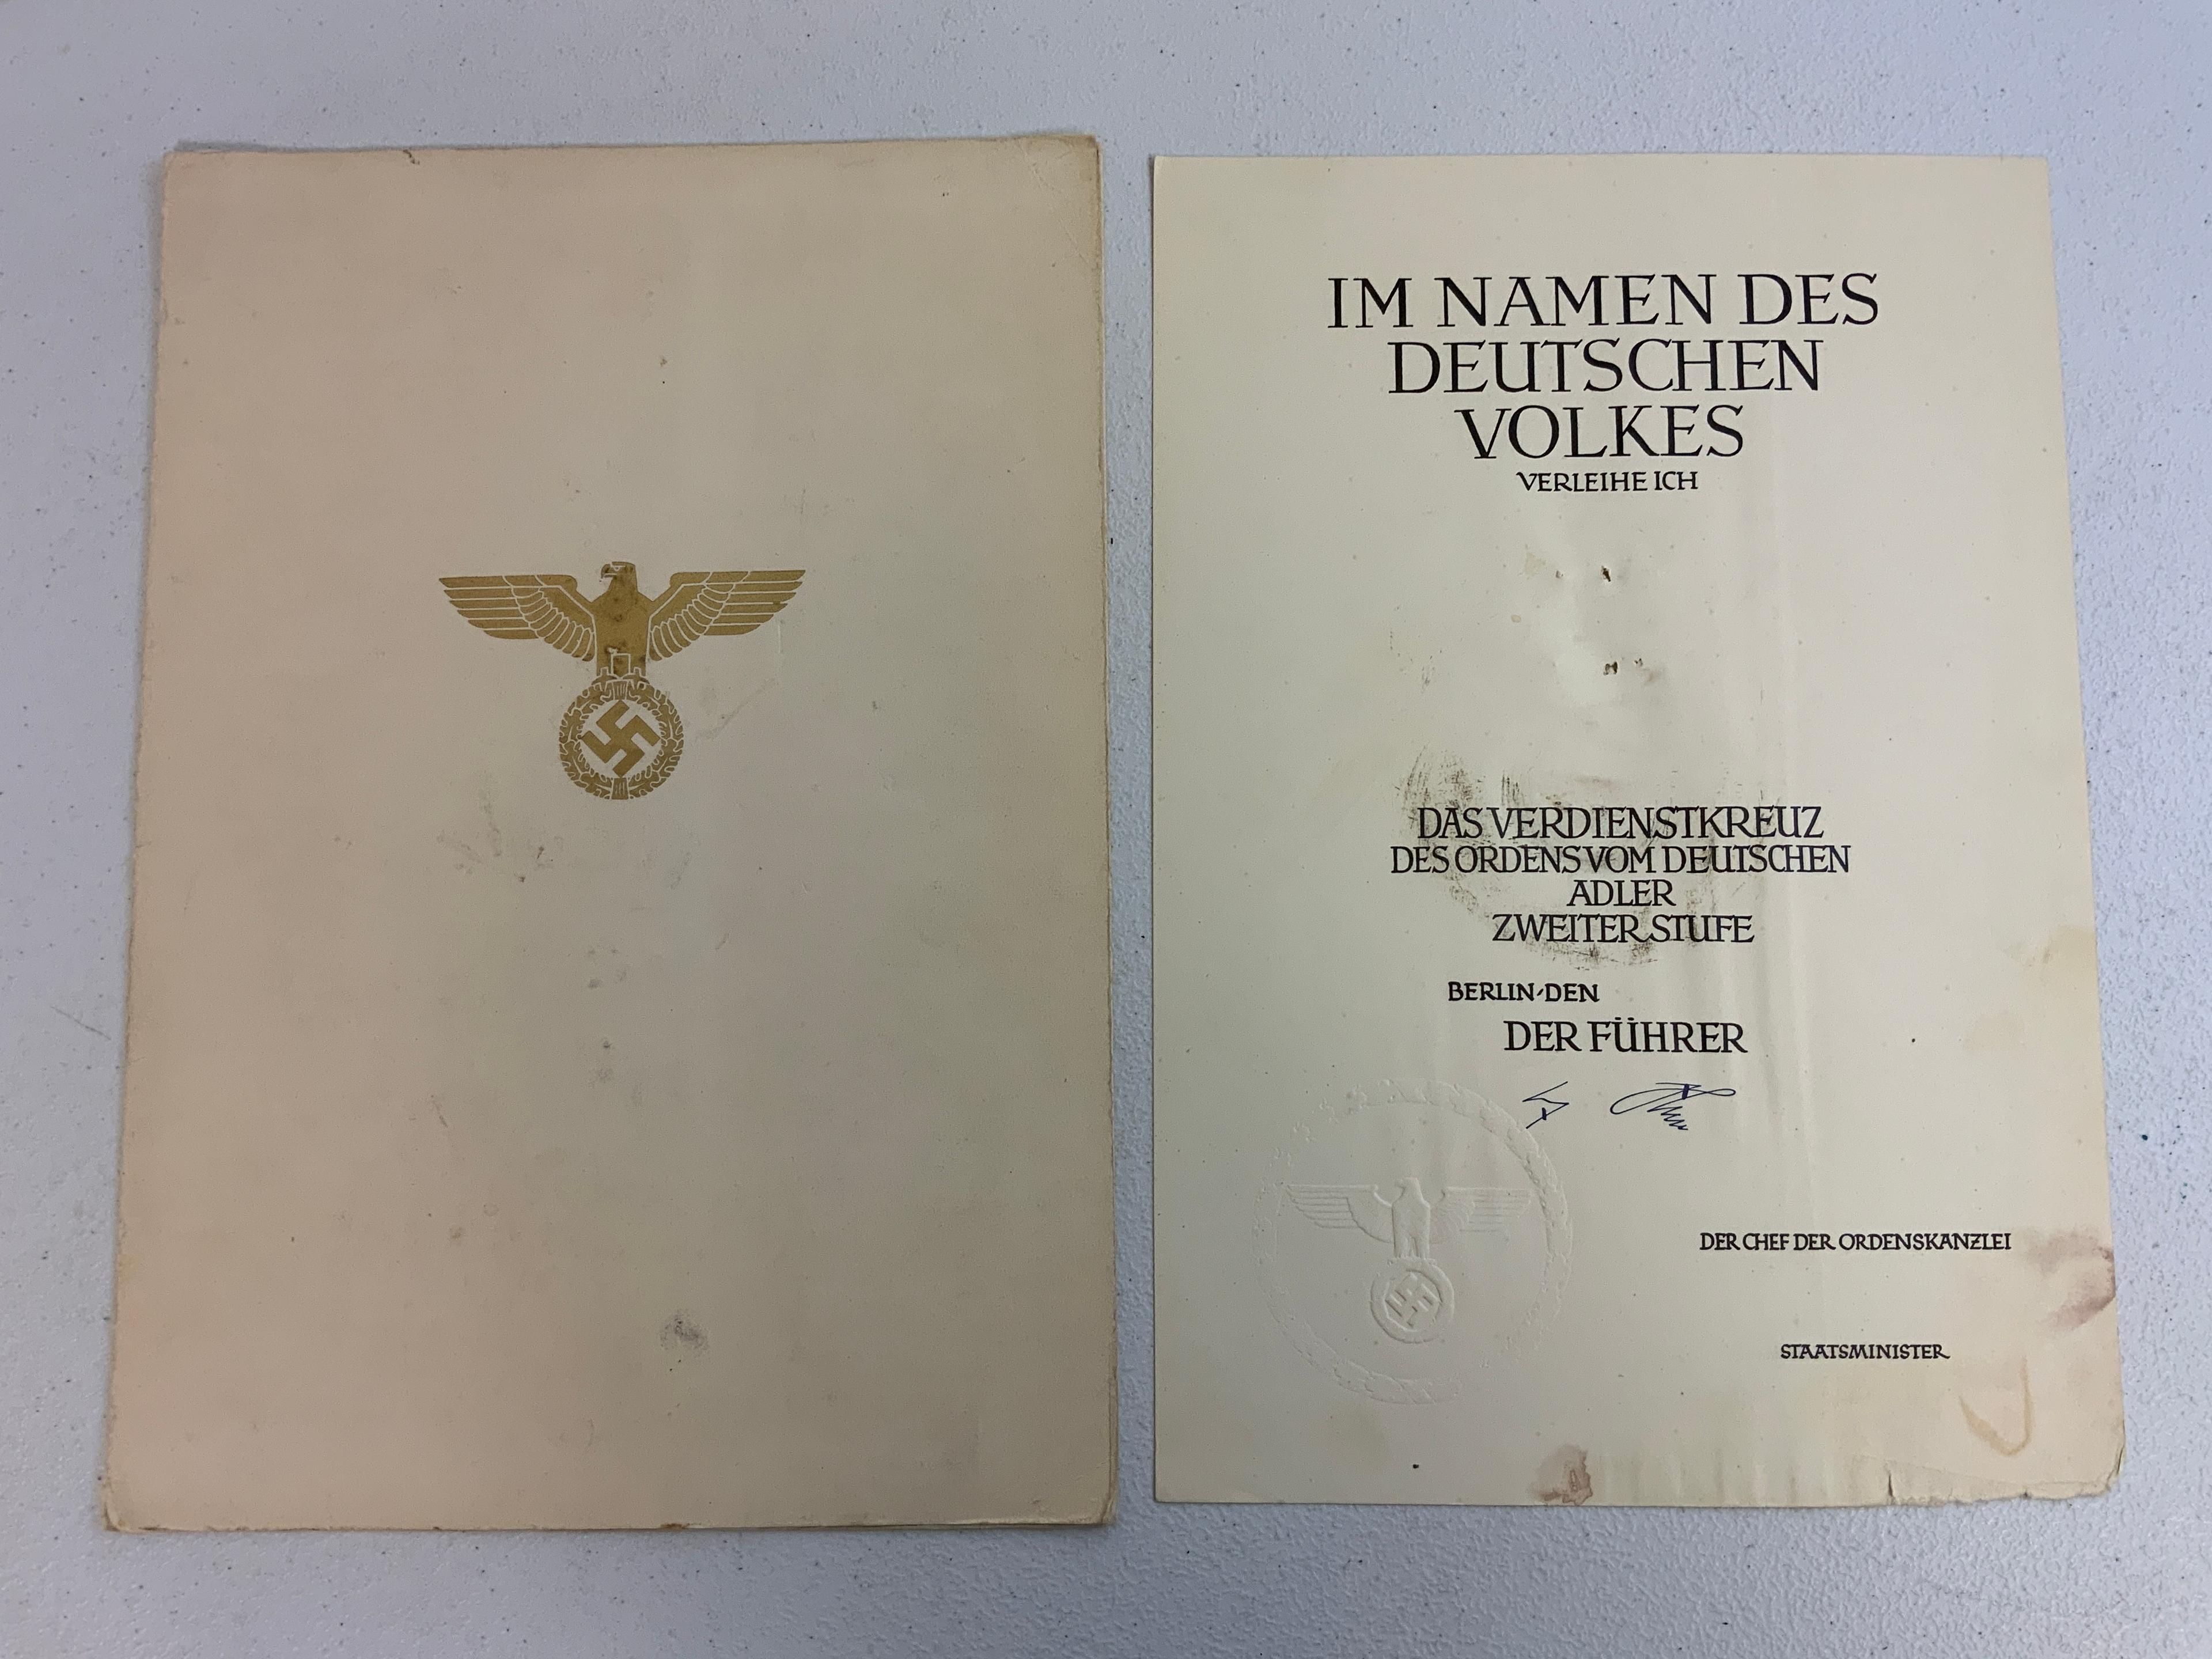 THIRD REICH GERMAN 2ND CLASS EAGLE ORDER DOCUMENT AND SLEEVE